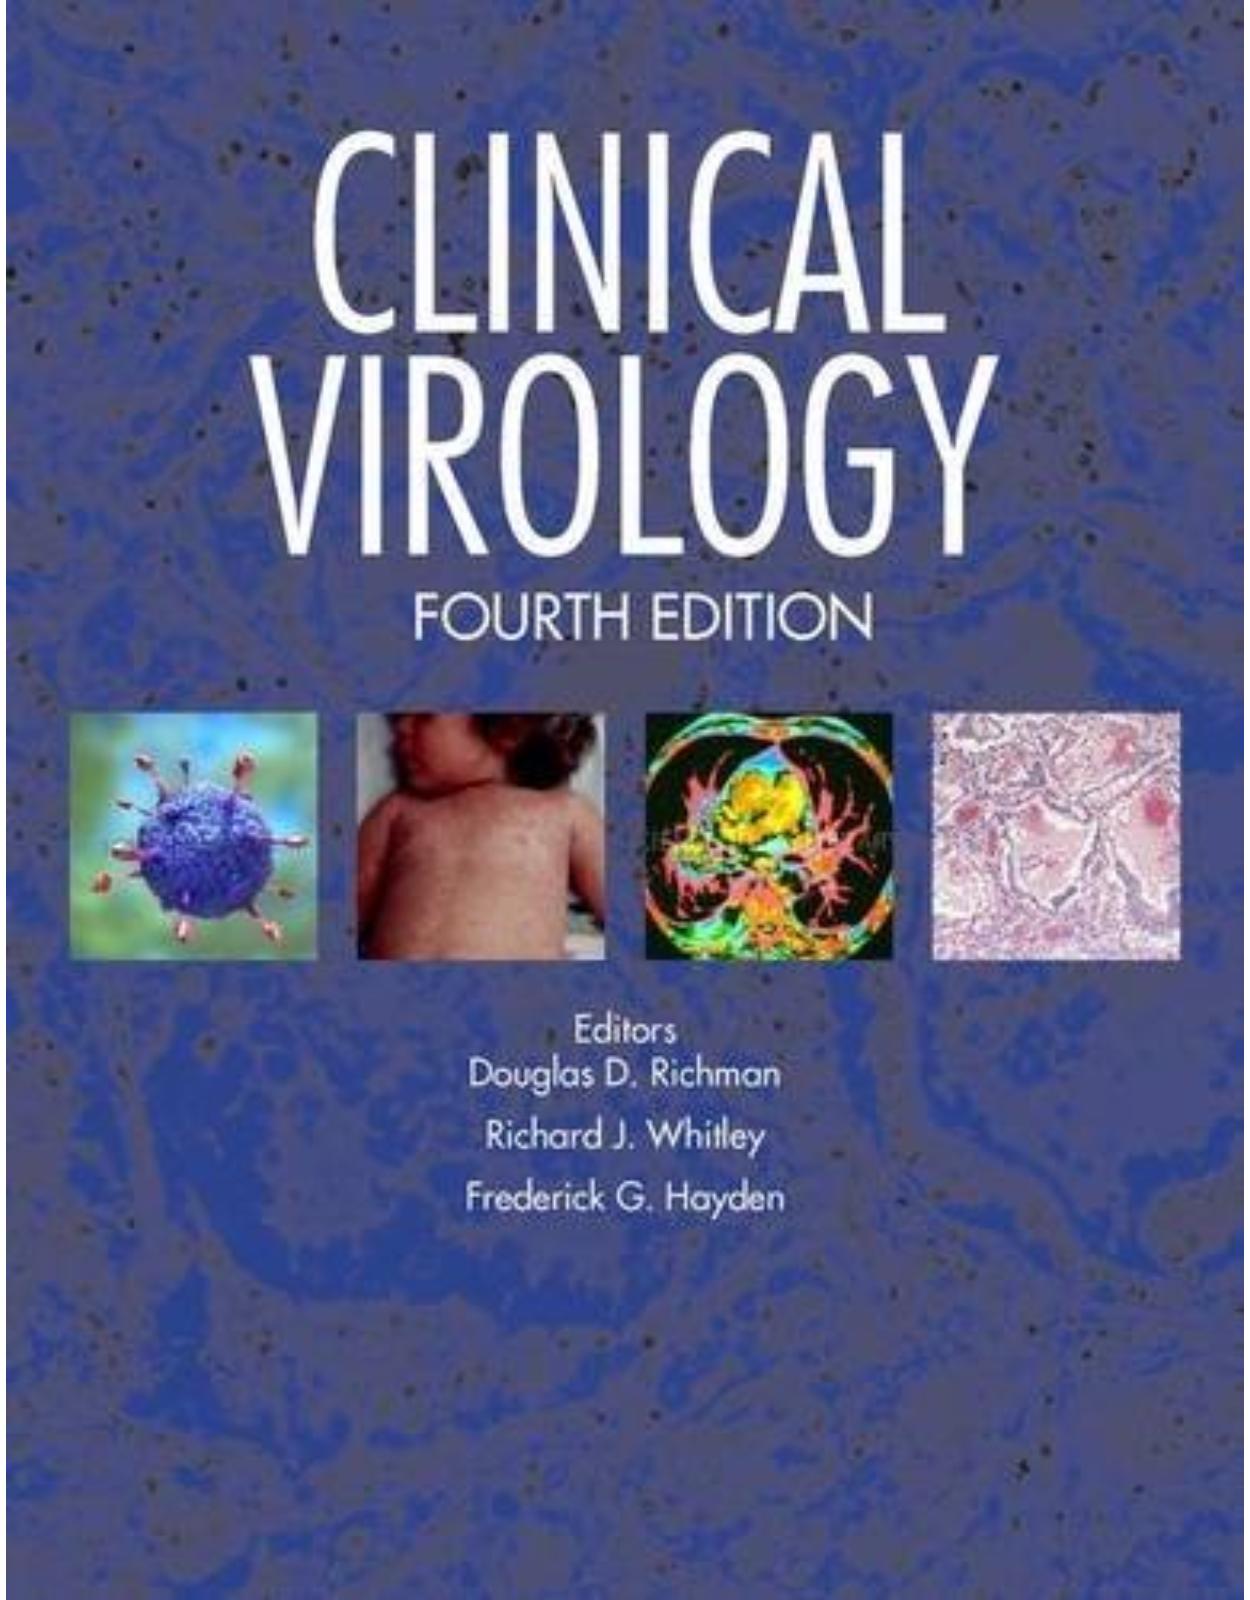 Clinical Virology, Fourth Edition